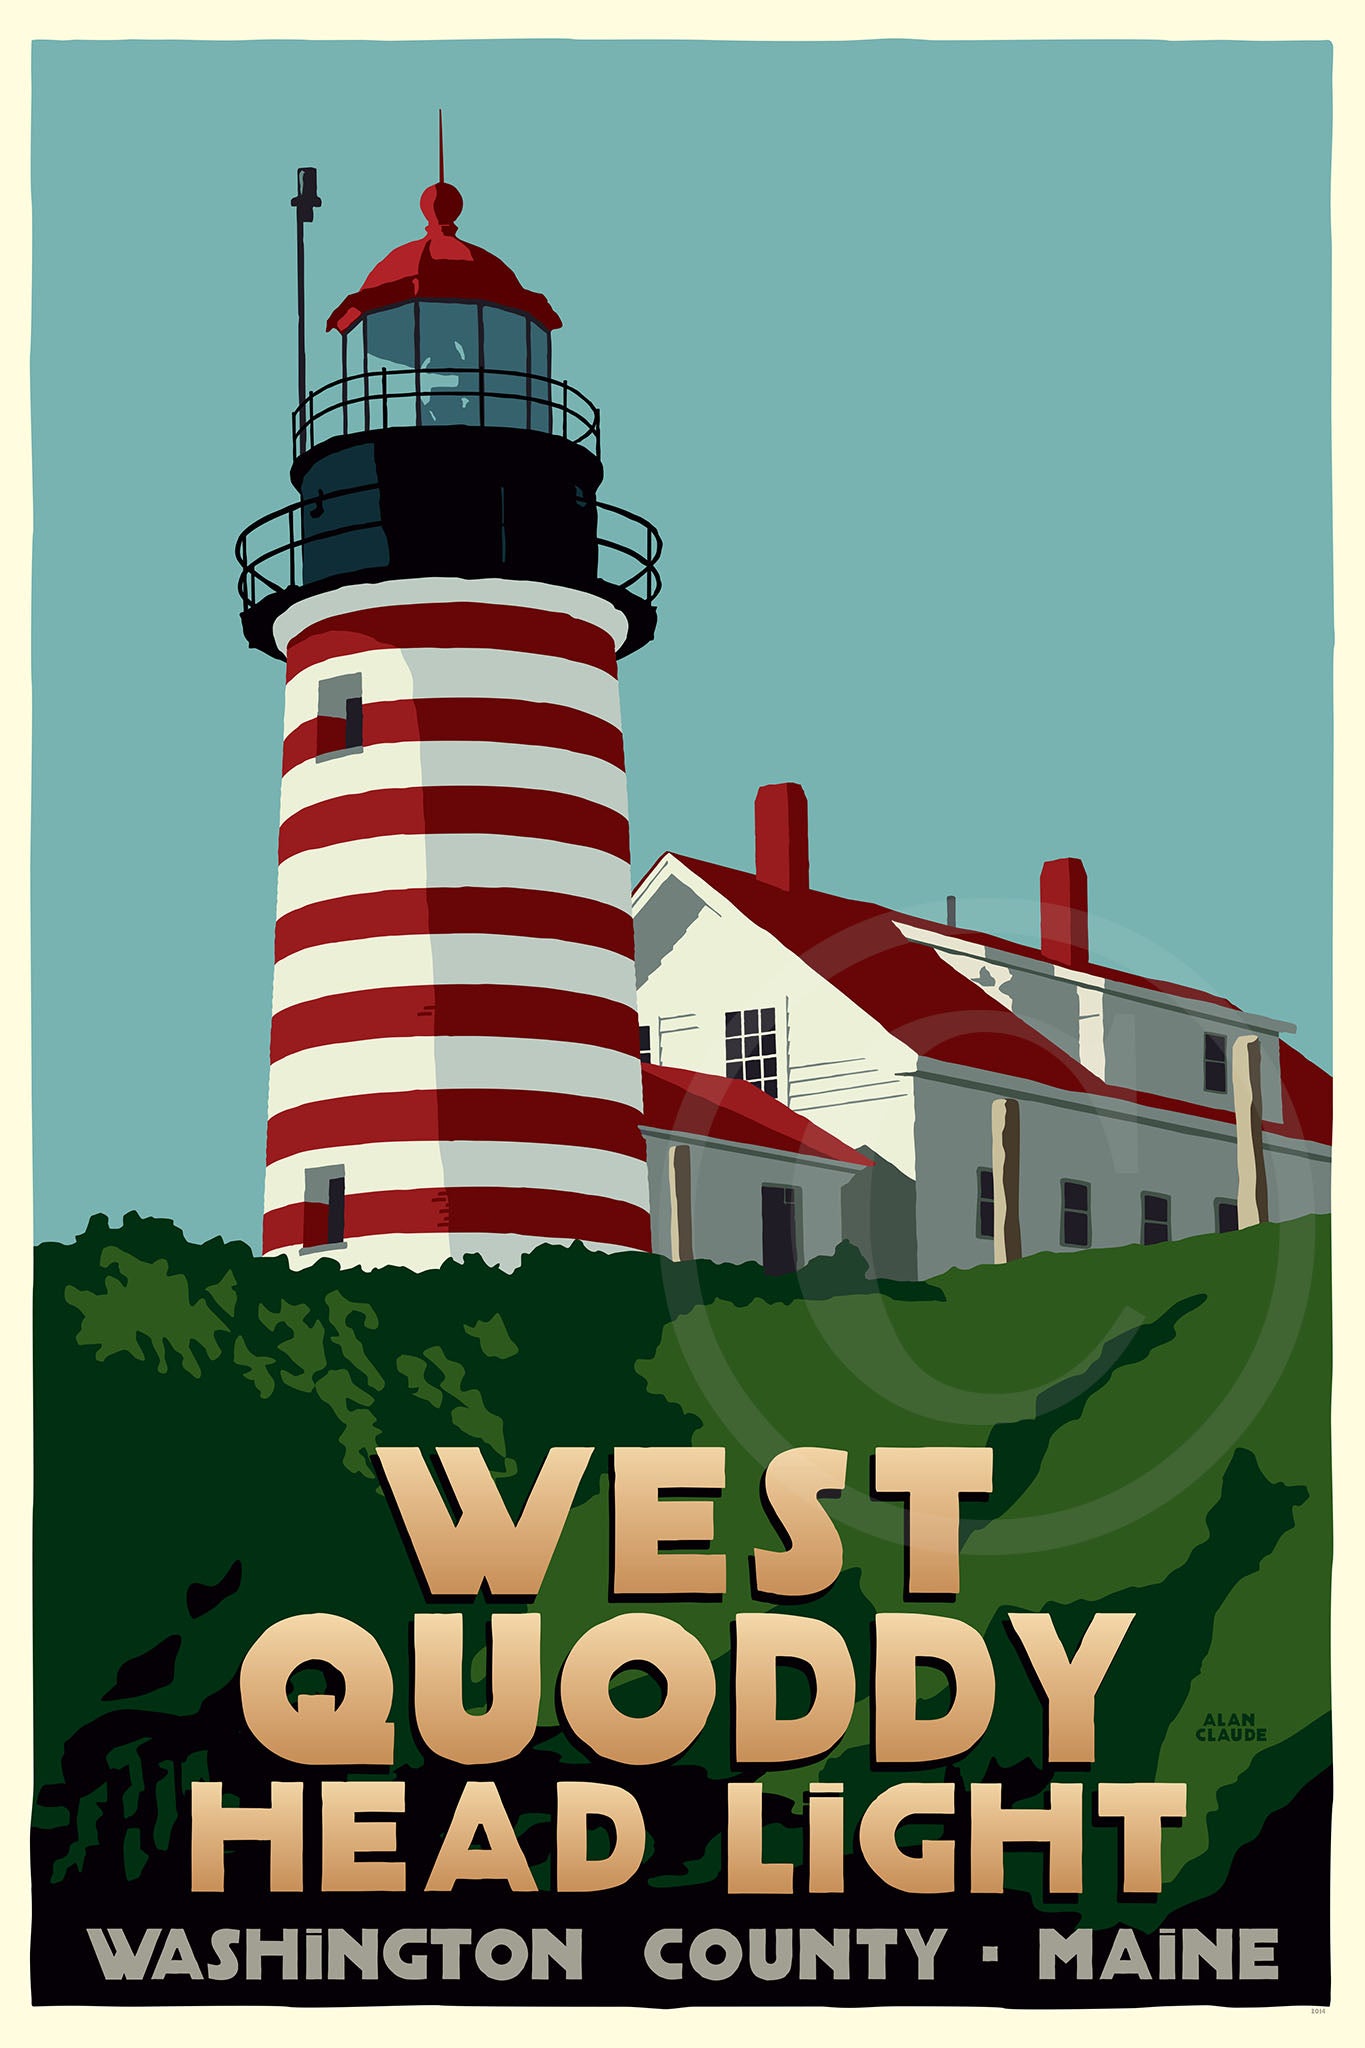 West Quoddy Head Light Art Print 24" x 36" Travel Poster By Alan Claude - Maine